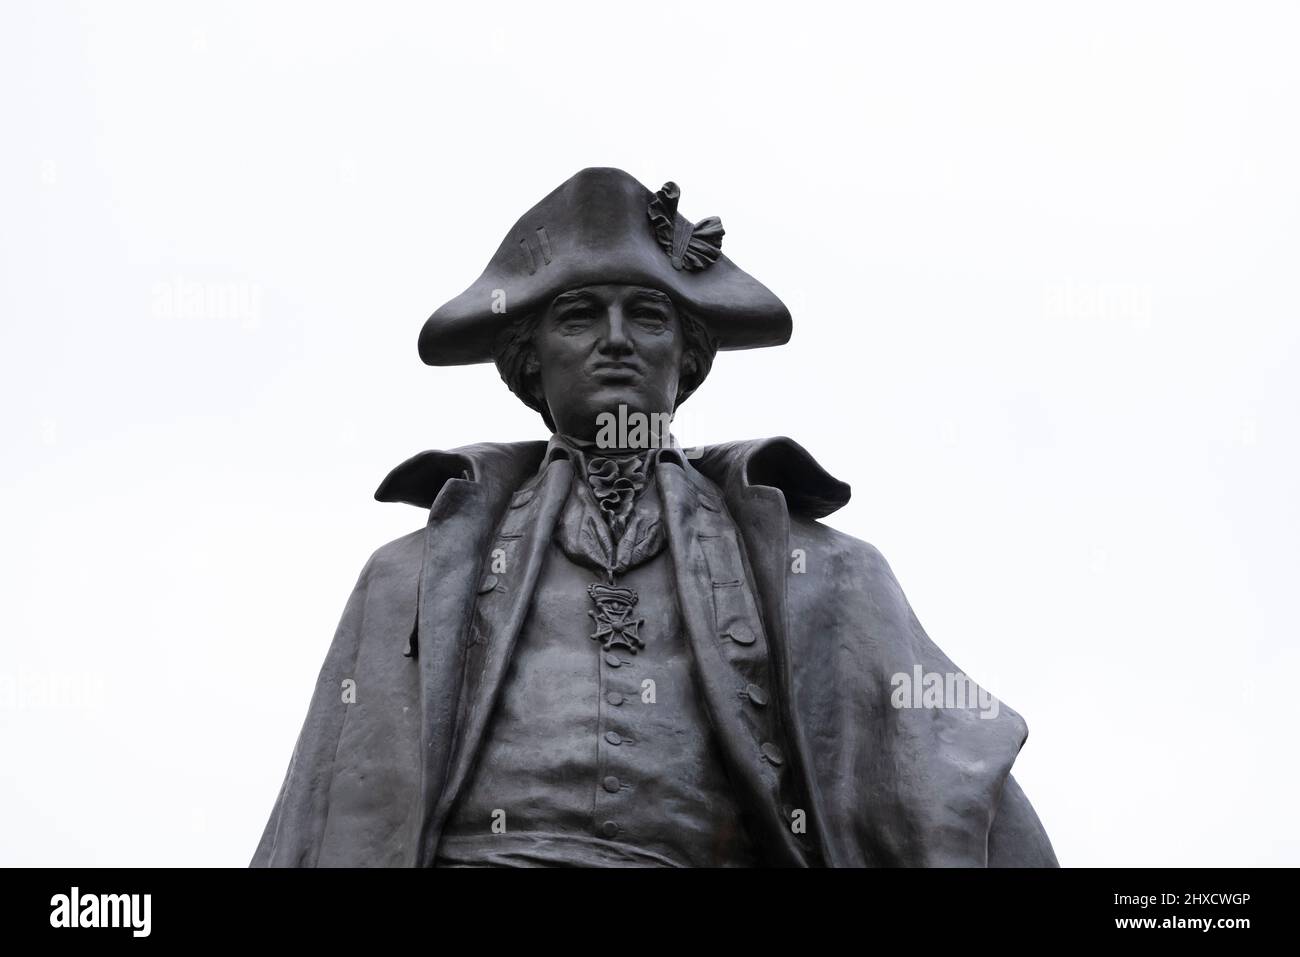 Germany, Saxony-Anhalt, Magdeburg, monument to General Friedrich Wilhelm von Steuben, fought in the American War of Independence, was born in Magdeburg on September 17, 1730. Stock Photo